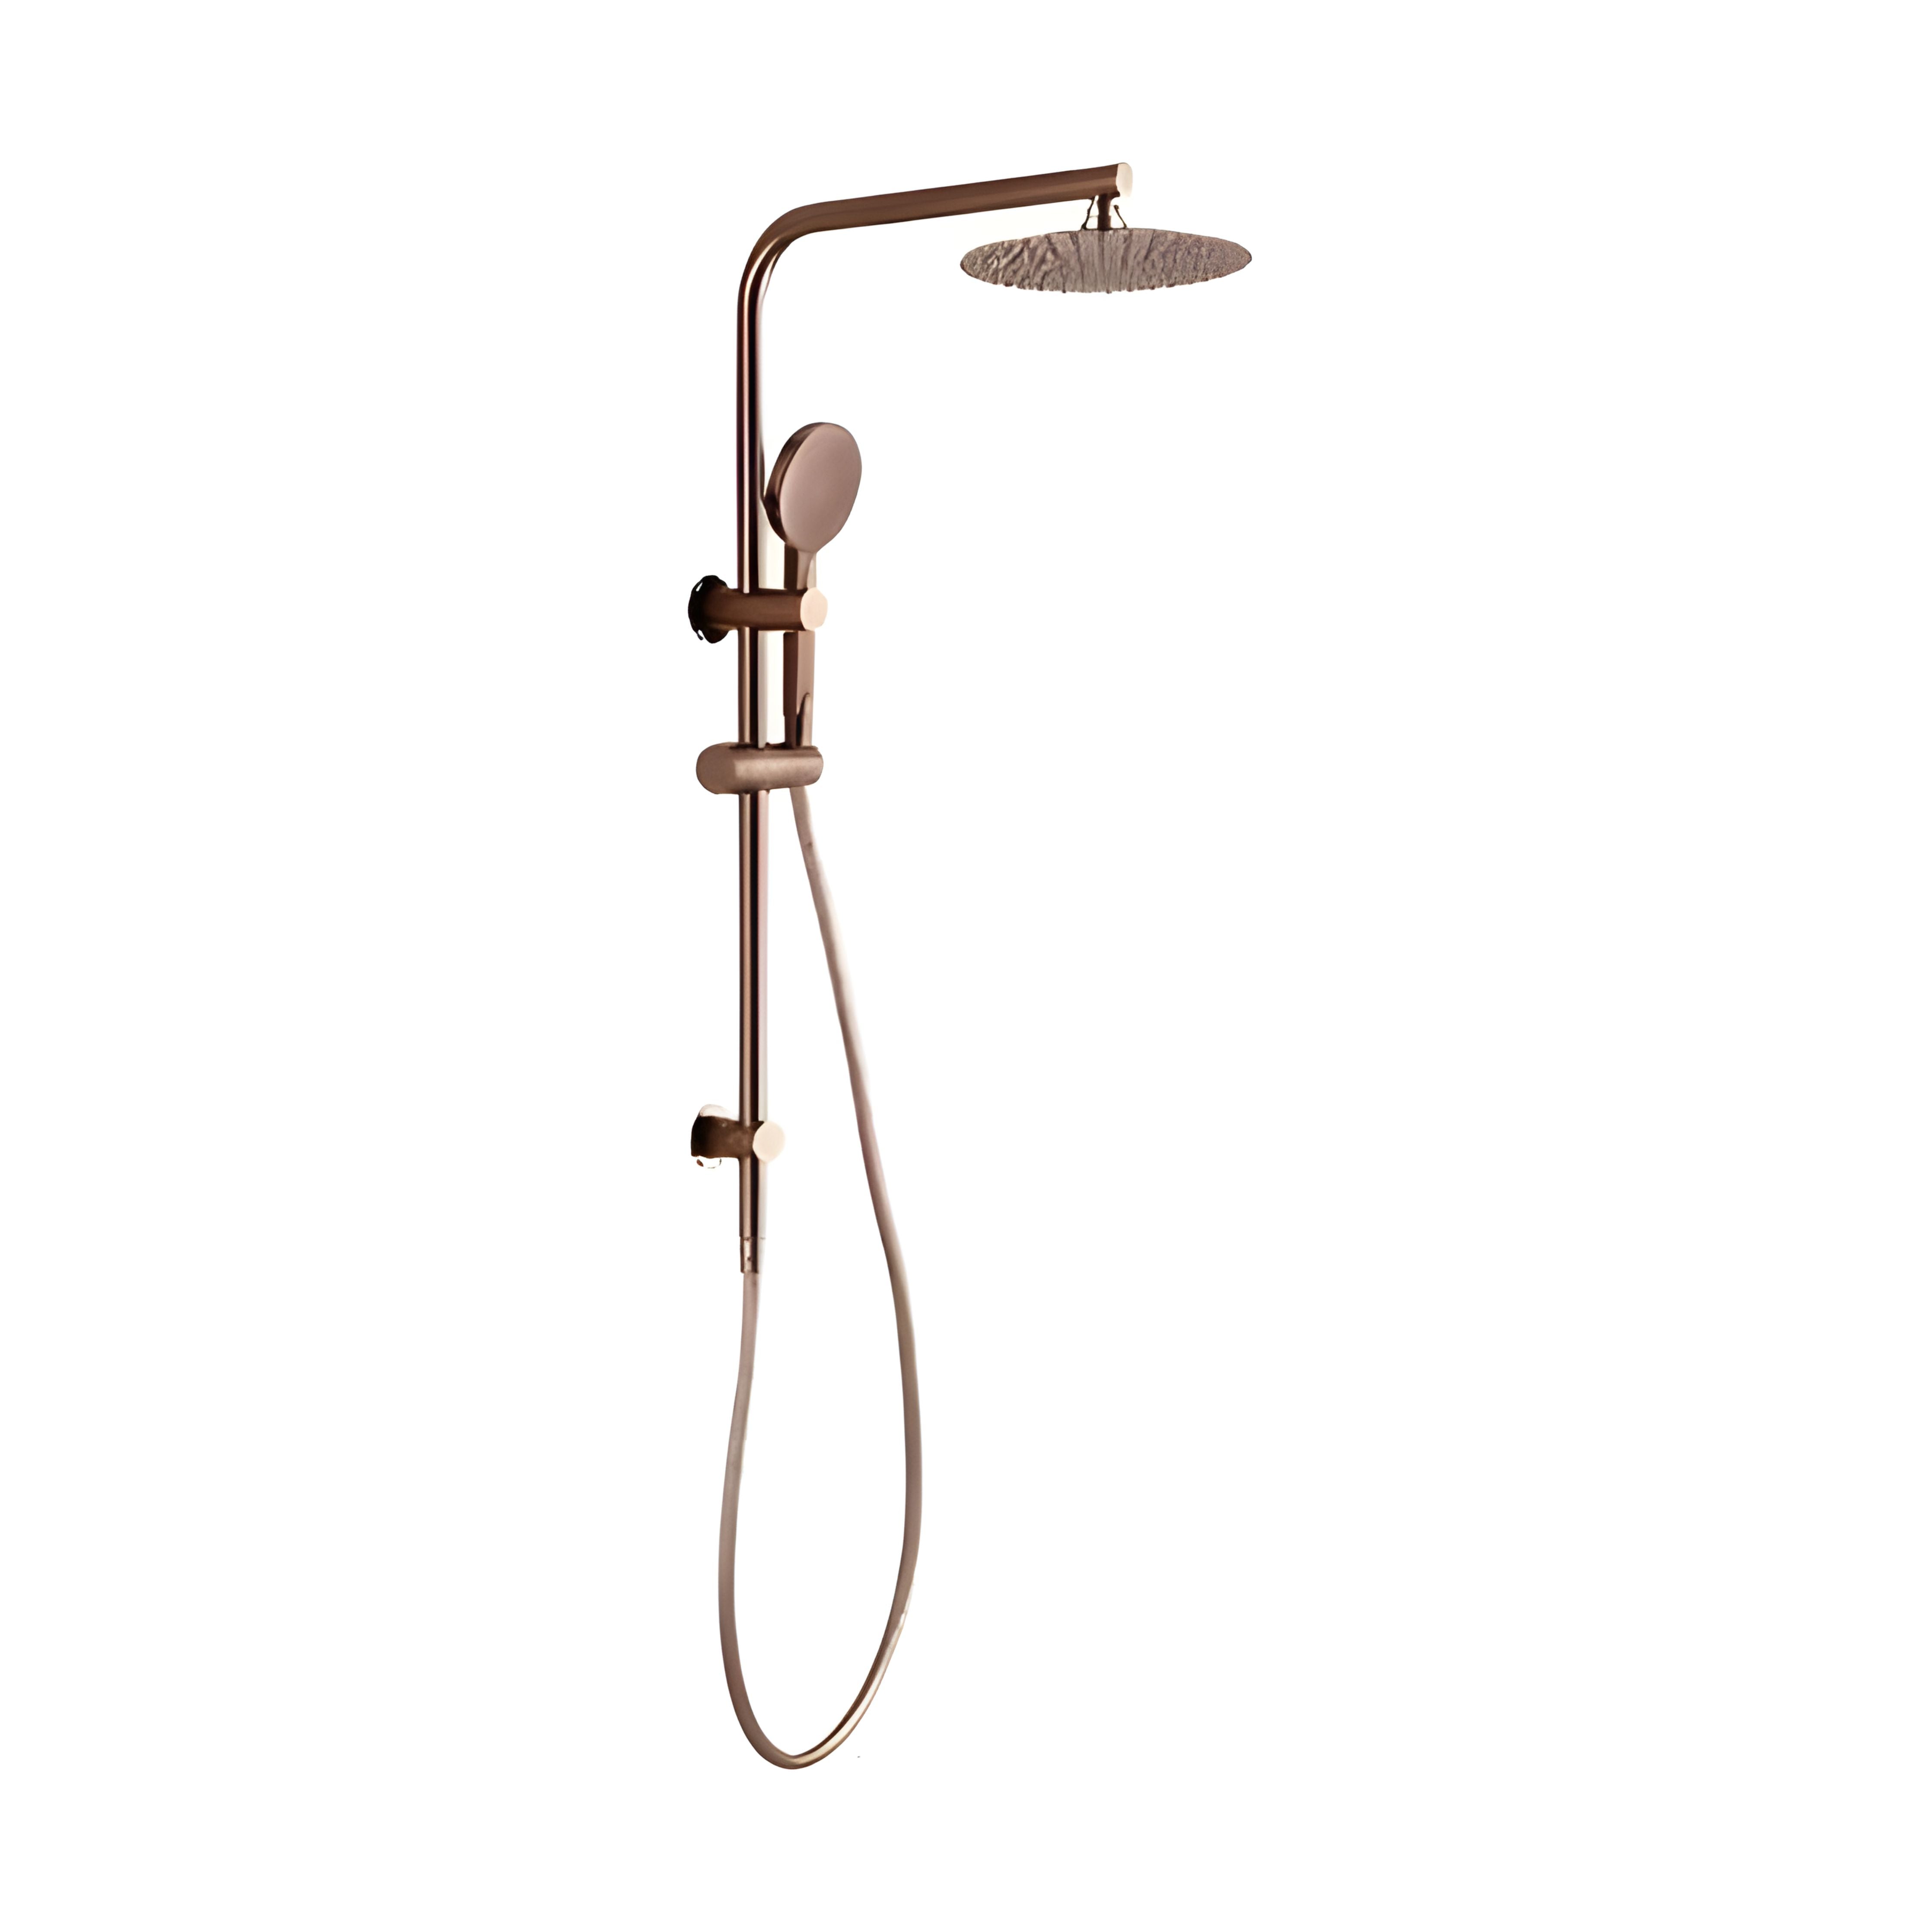 HELLYCAR CUTER SHOWER SYSTEM WITH RAIL ROSE GOLD